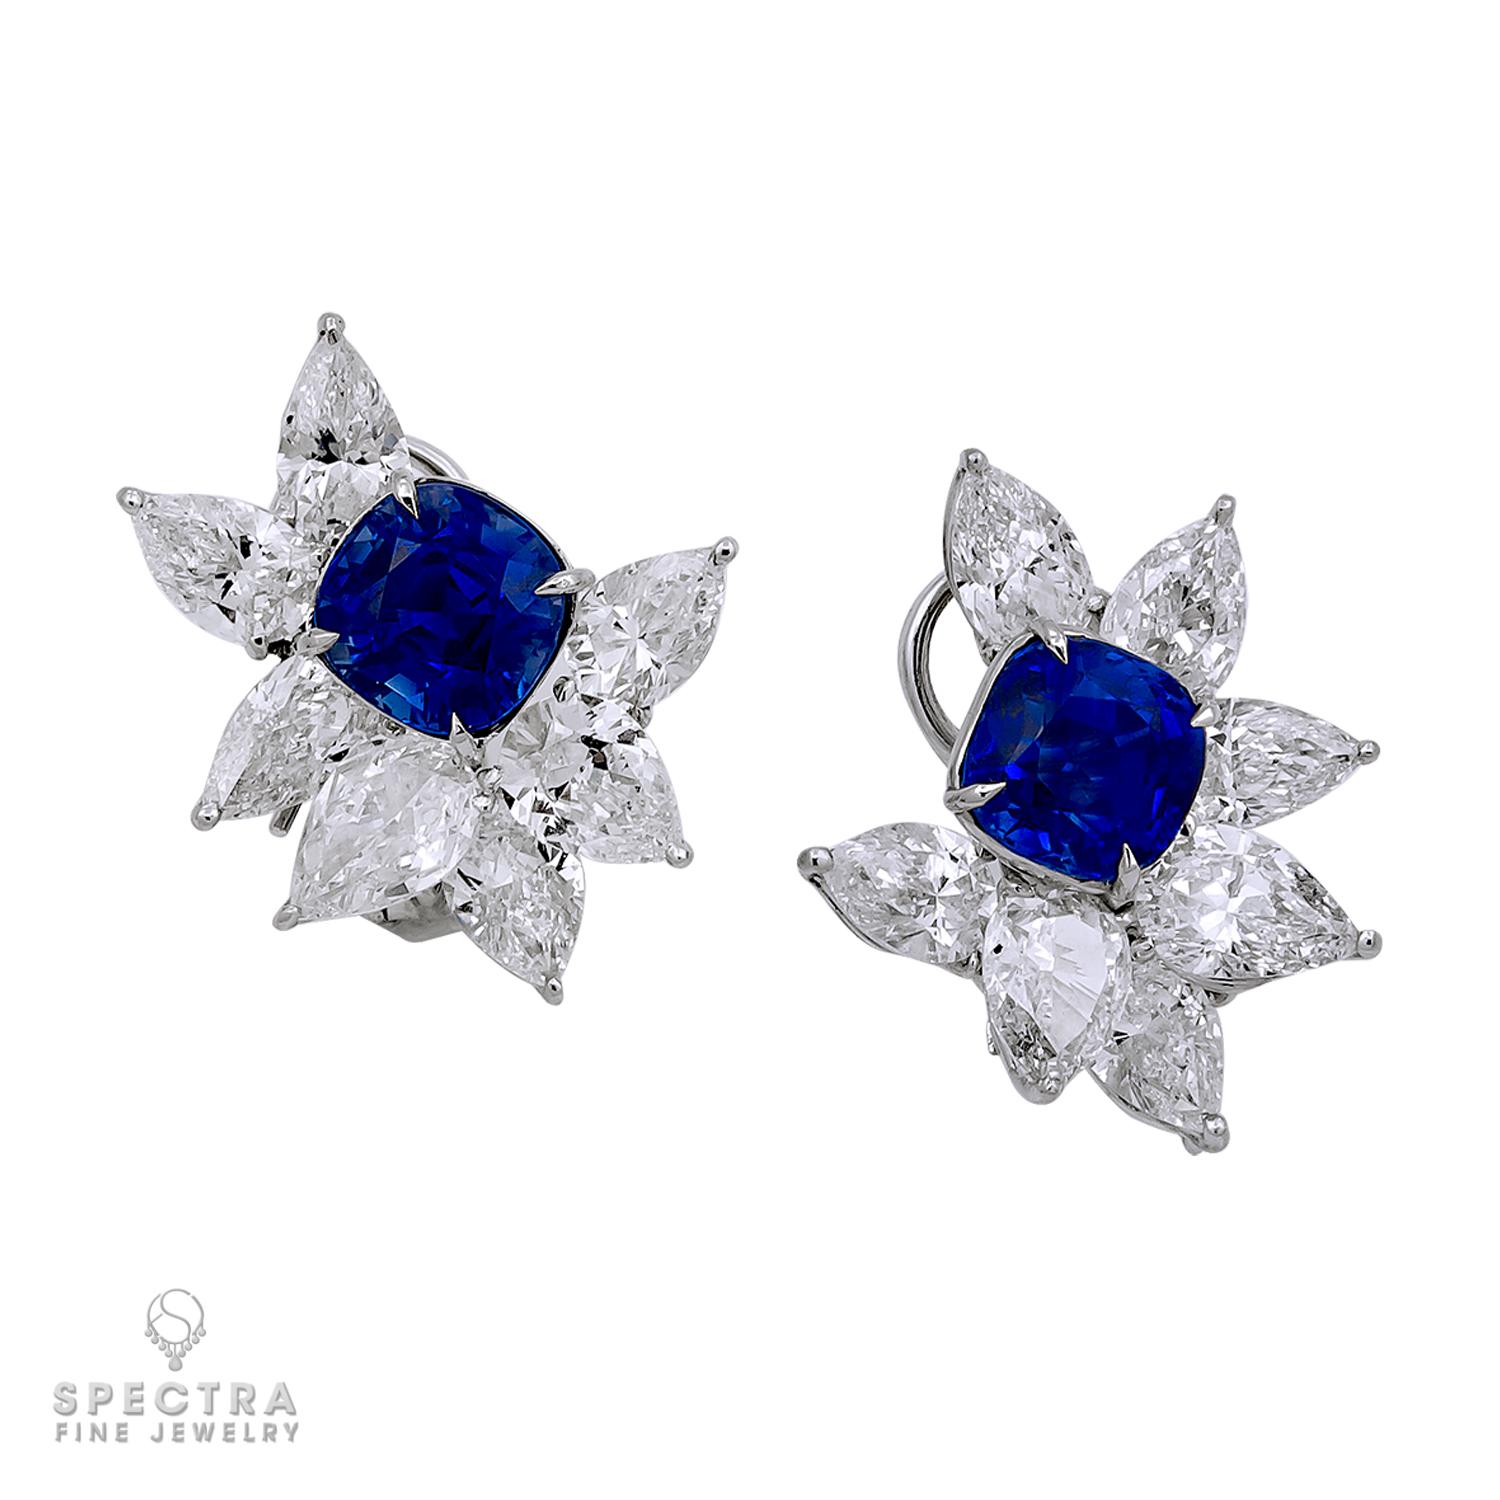 Introducing our exquisite Cluster Earrings, a breathtaking embodiment of timeless elegance and rare sophistication. These earrings feature a mesmerizing pair of Kashmir sapphires, renowned for their coveted 'cornflower' blue hue and velvety texture,